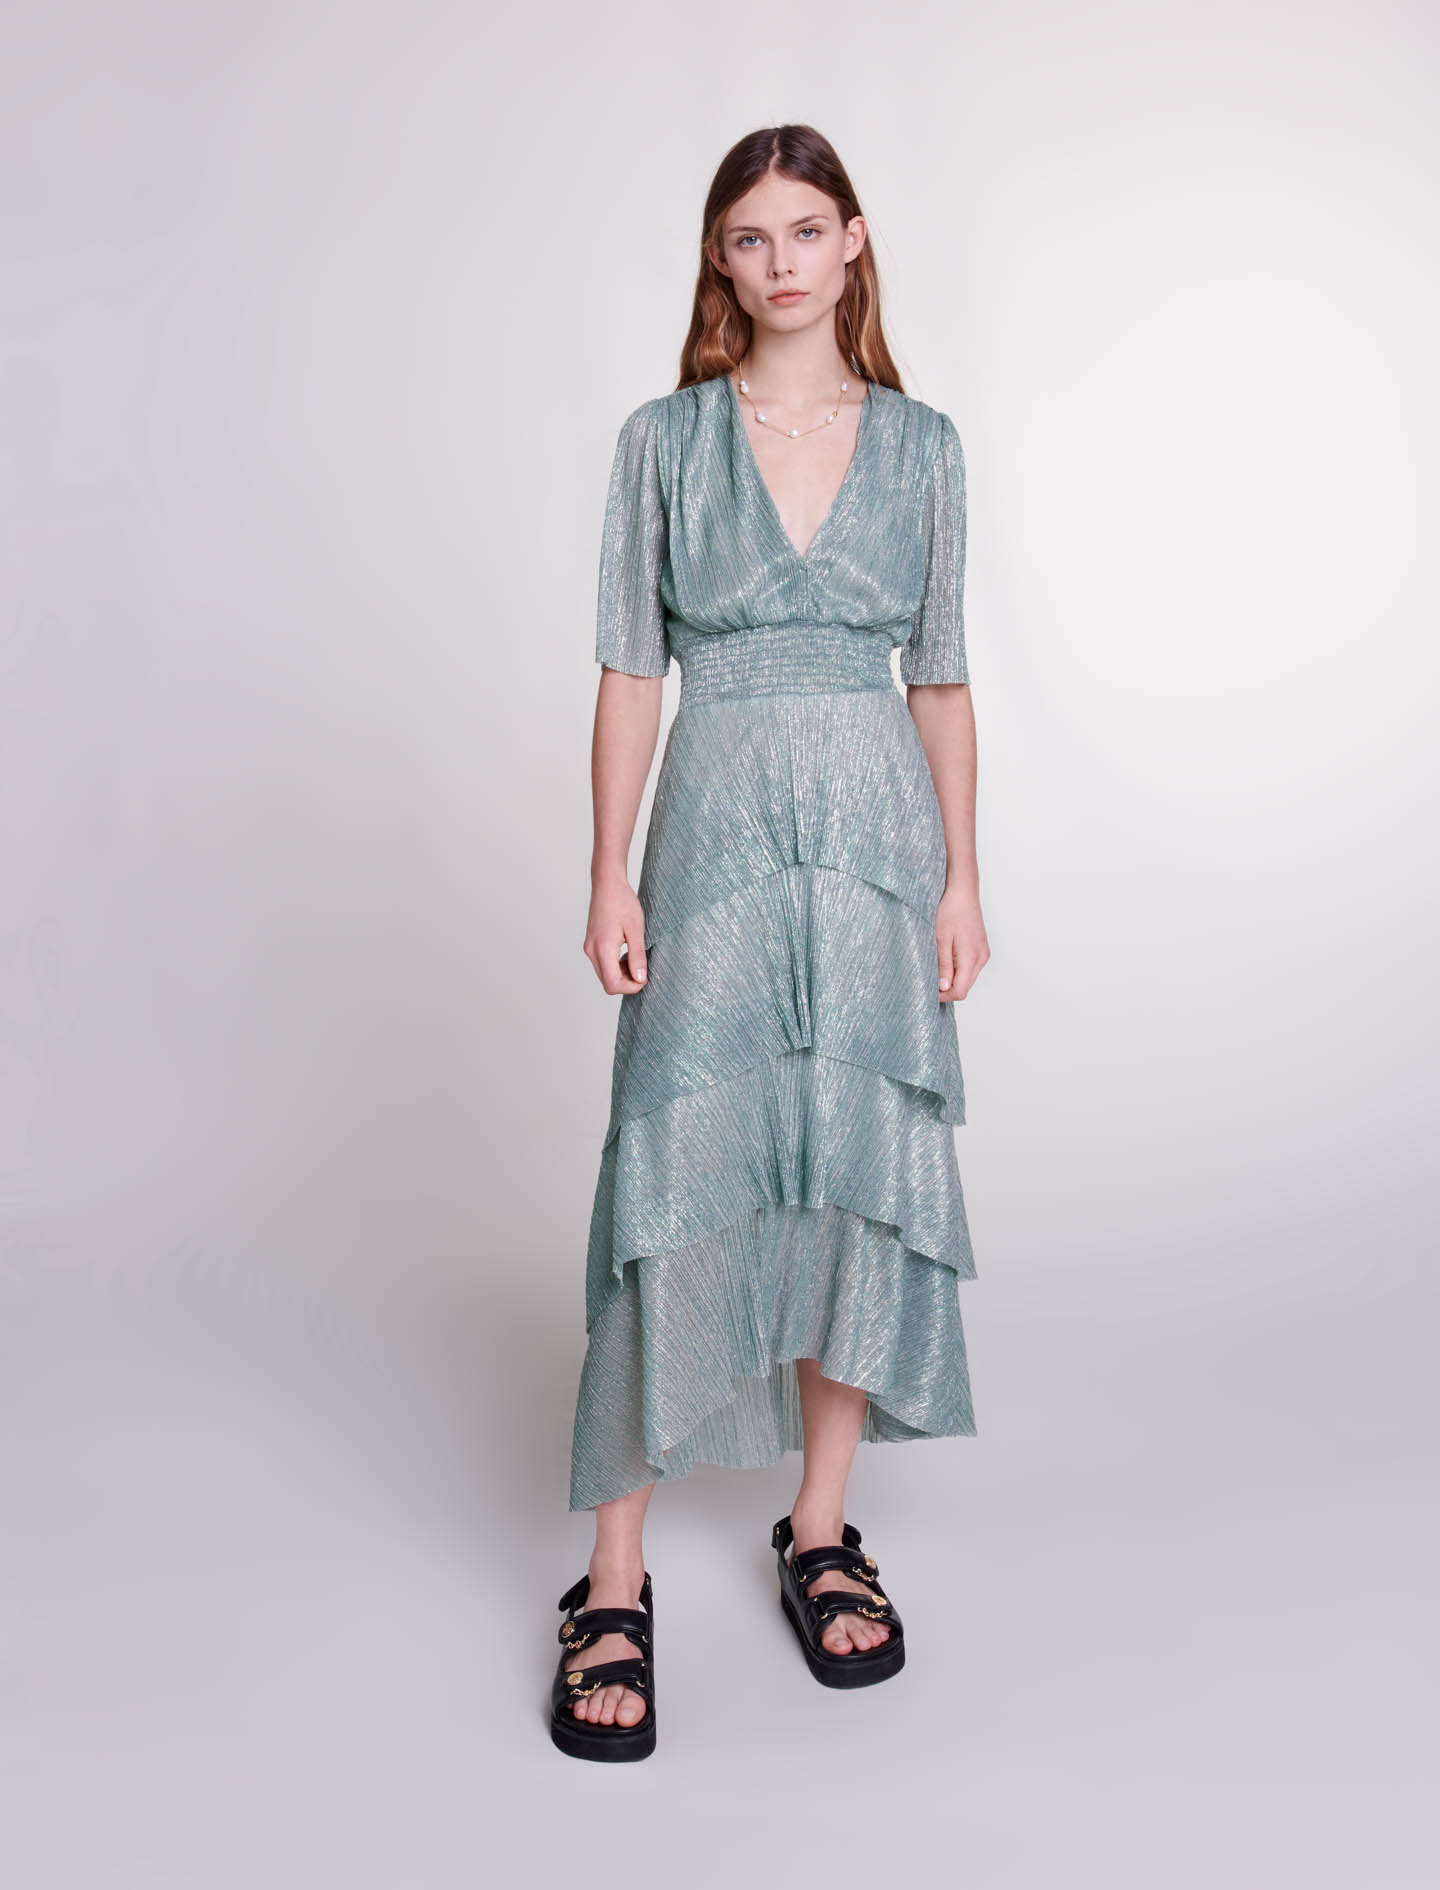 Maje Woman's polyester, Stretch lurex ruffled dress for Spring/Summer, in color Silver Green /